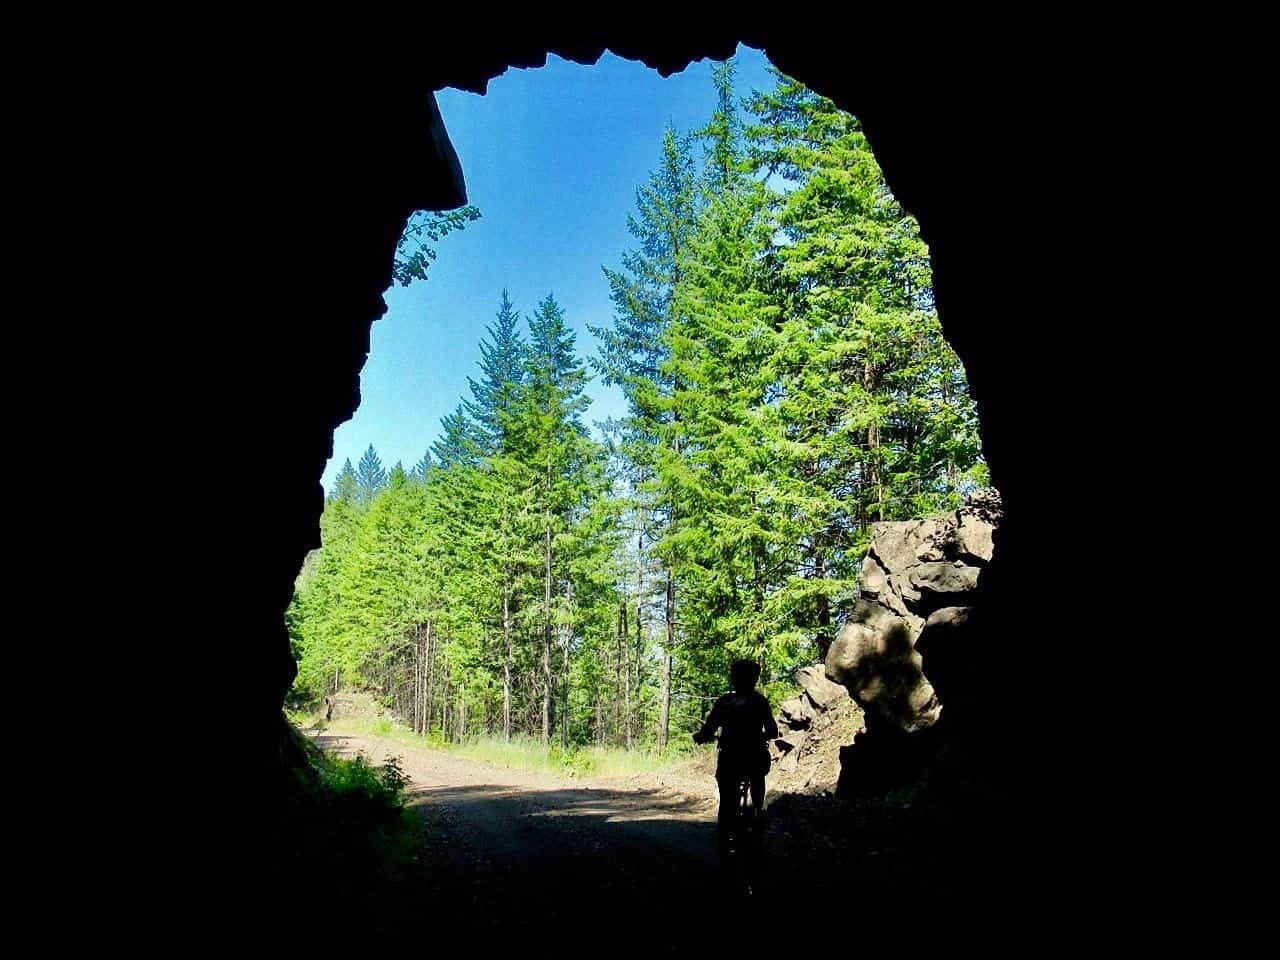 Shadowy image of person on bike coming out of dark tunnel in Castlegar BC Canada.